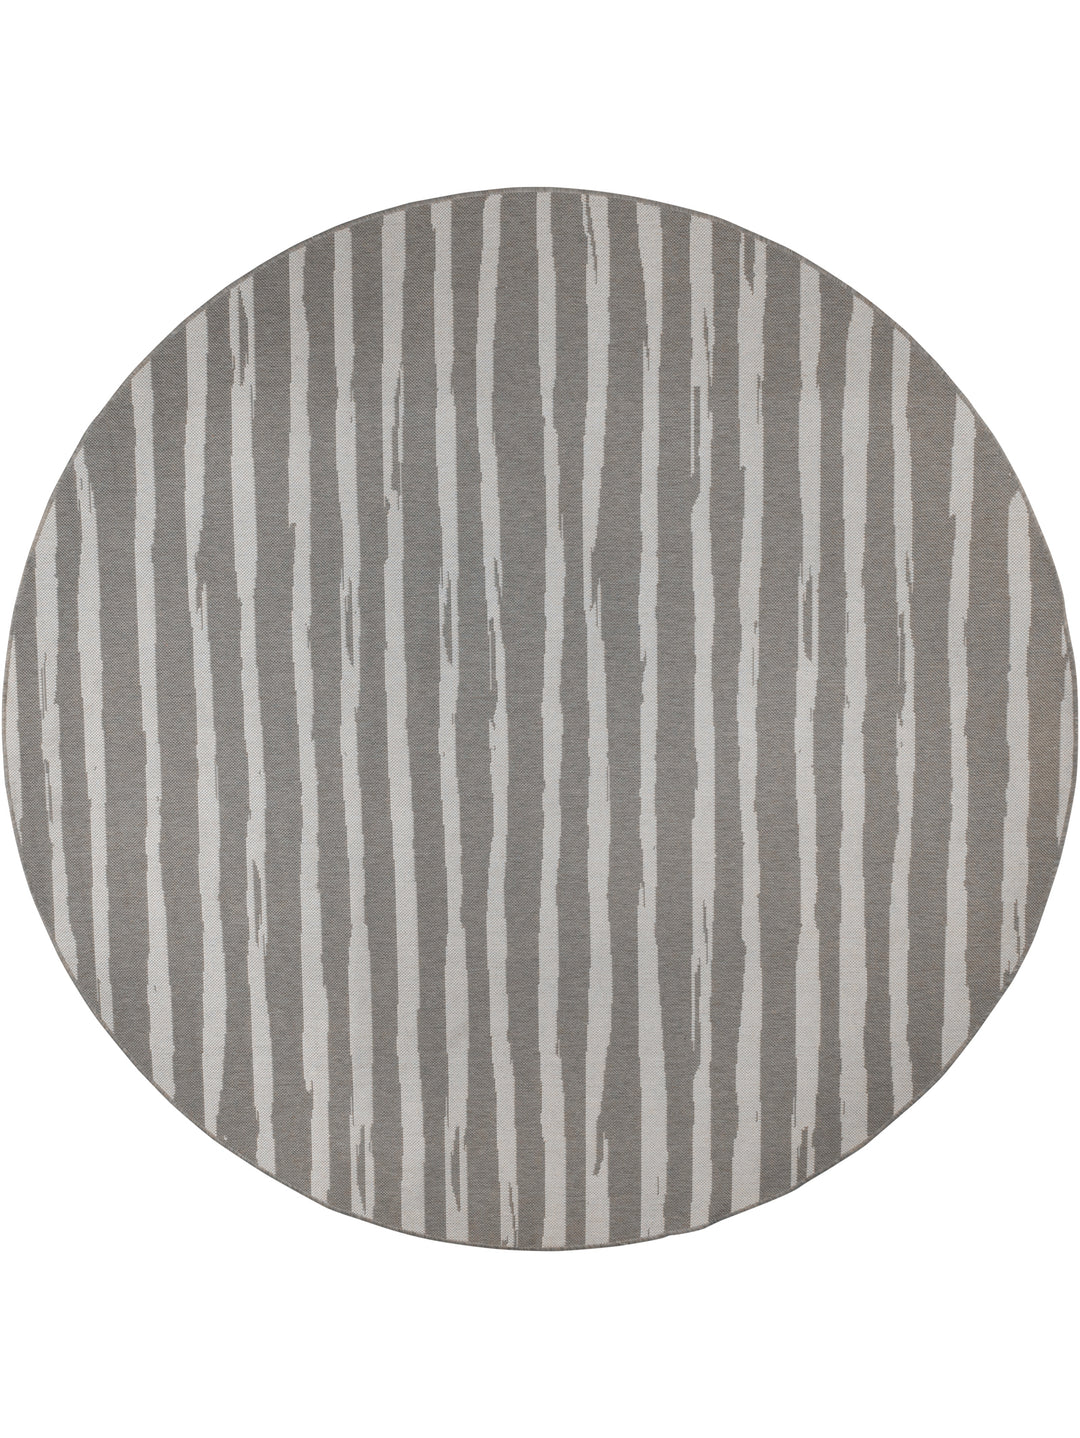 Right Circles Round Rug in Pebble